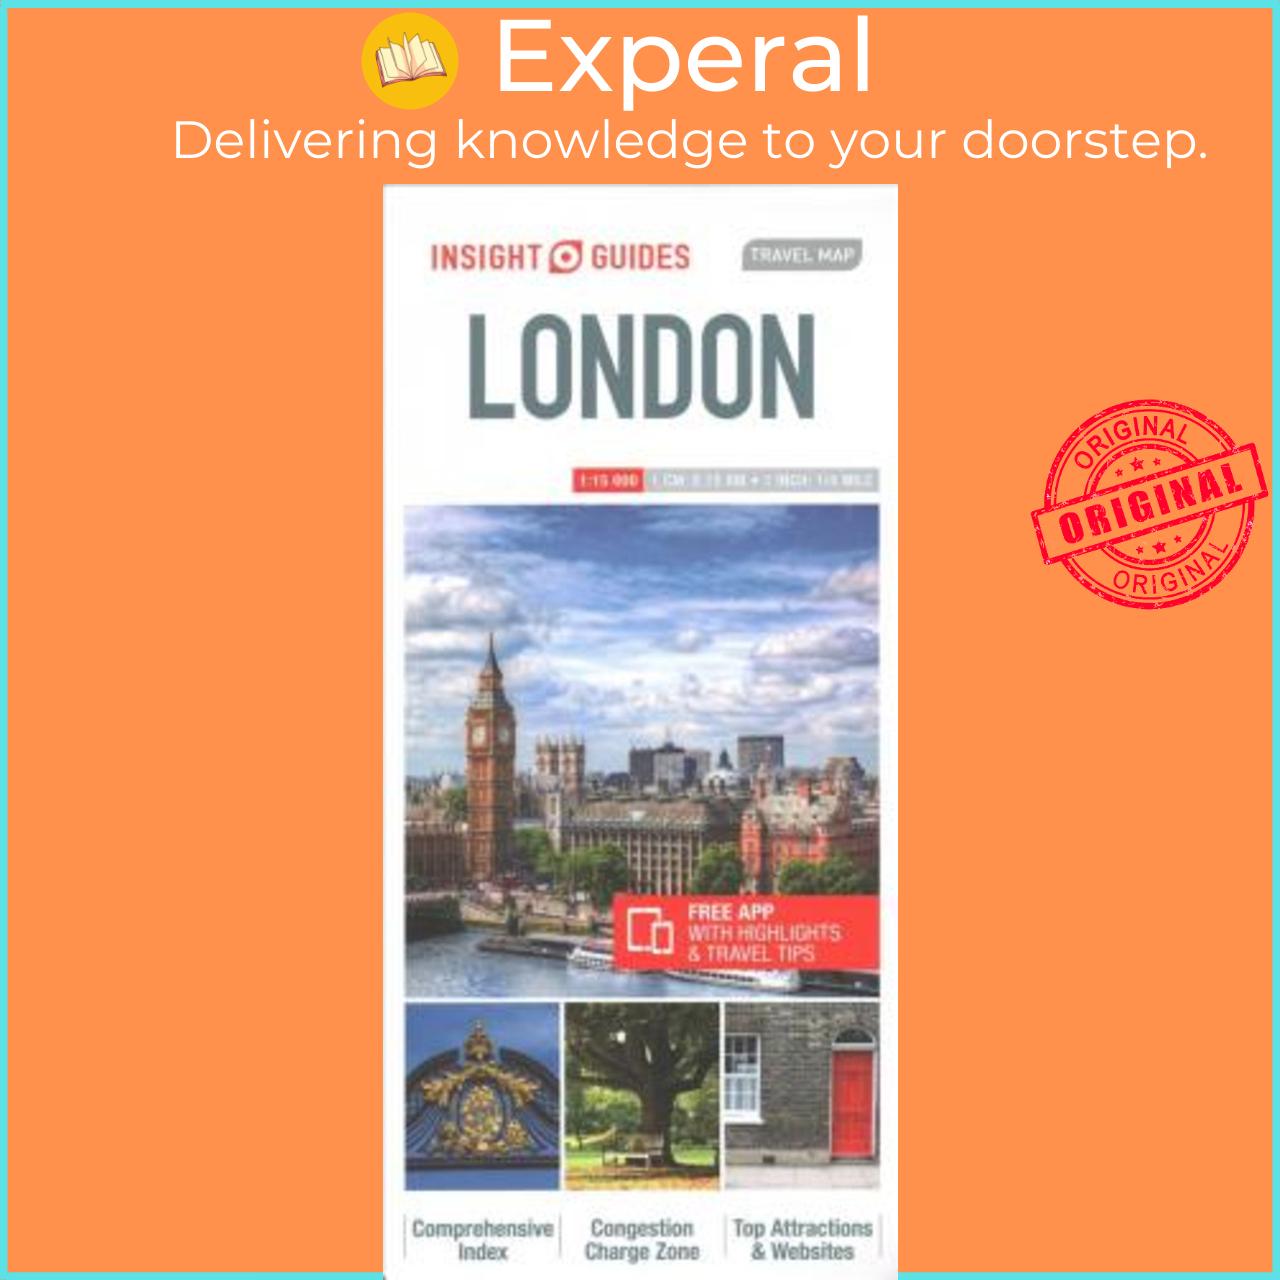 Sách - Insight Guides Travel Maps London by Insight Guides (UK edition, paperback)